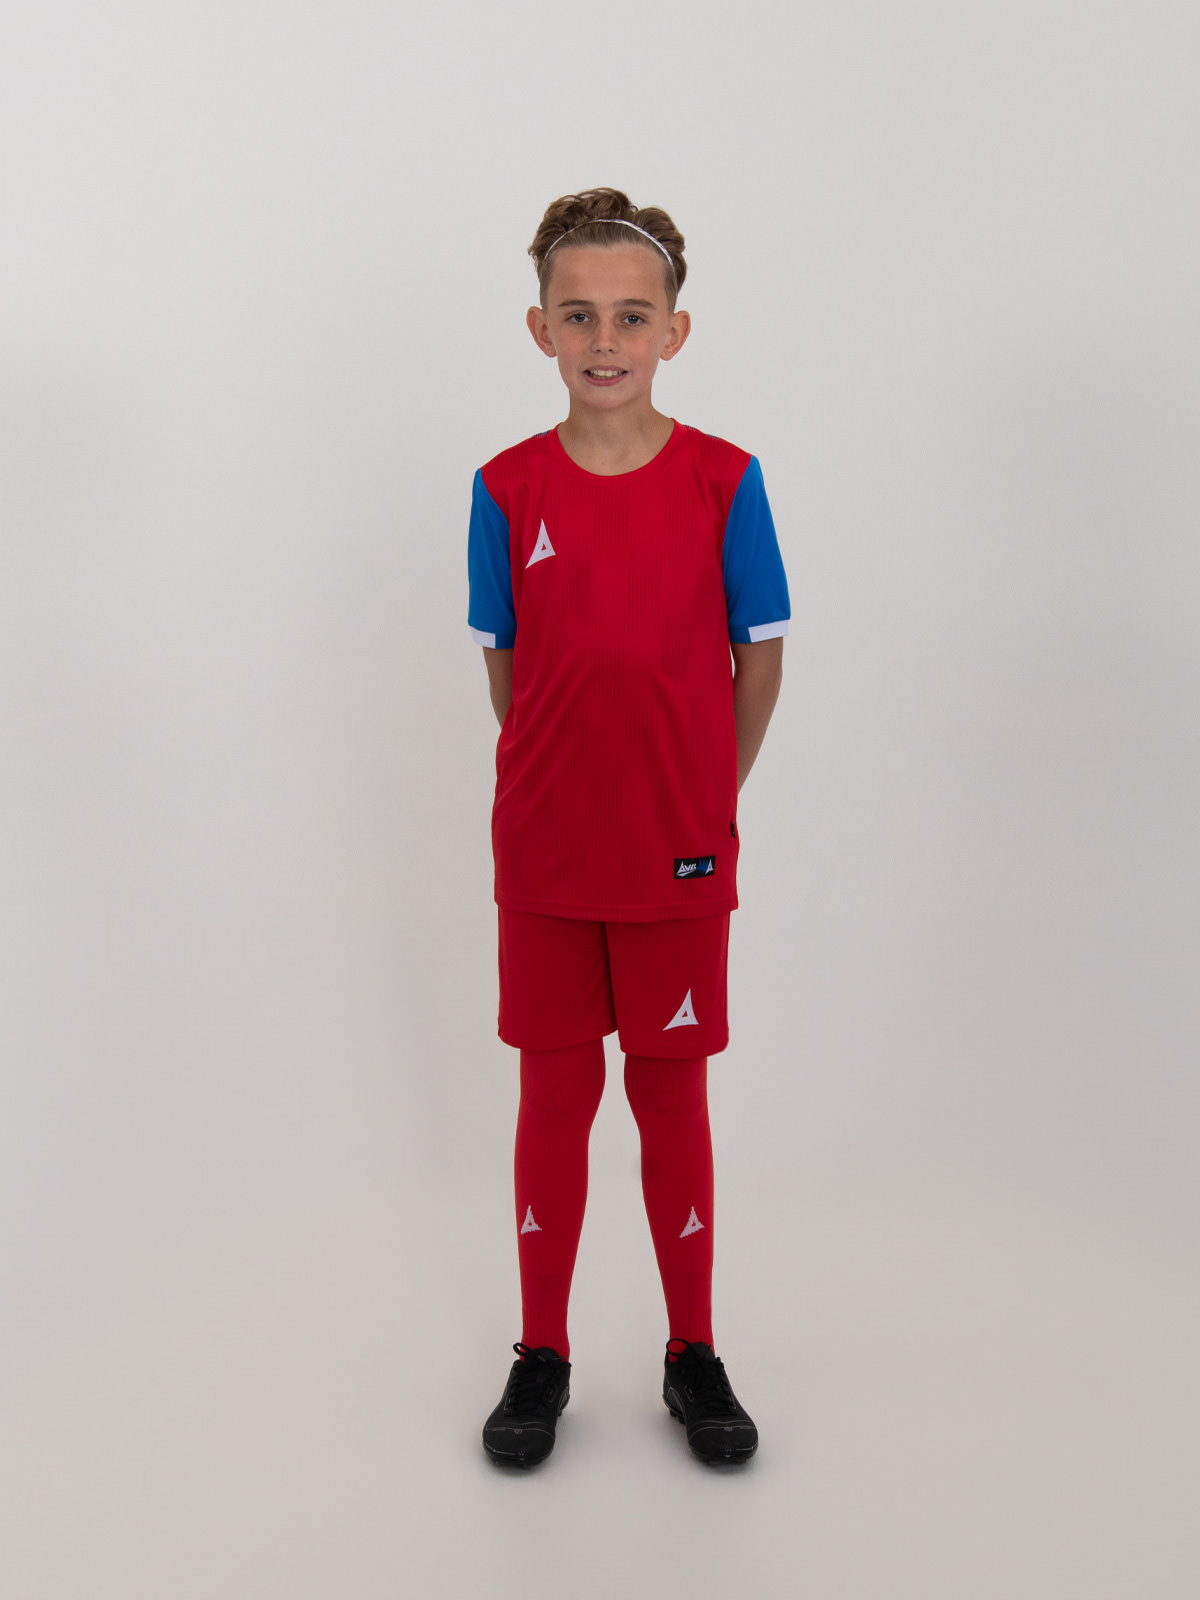 a kids red football kit with royal blue sleeve is being worn.